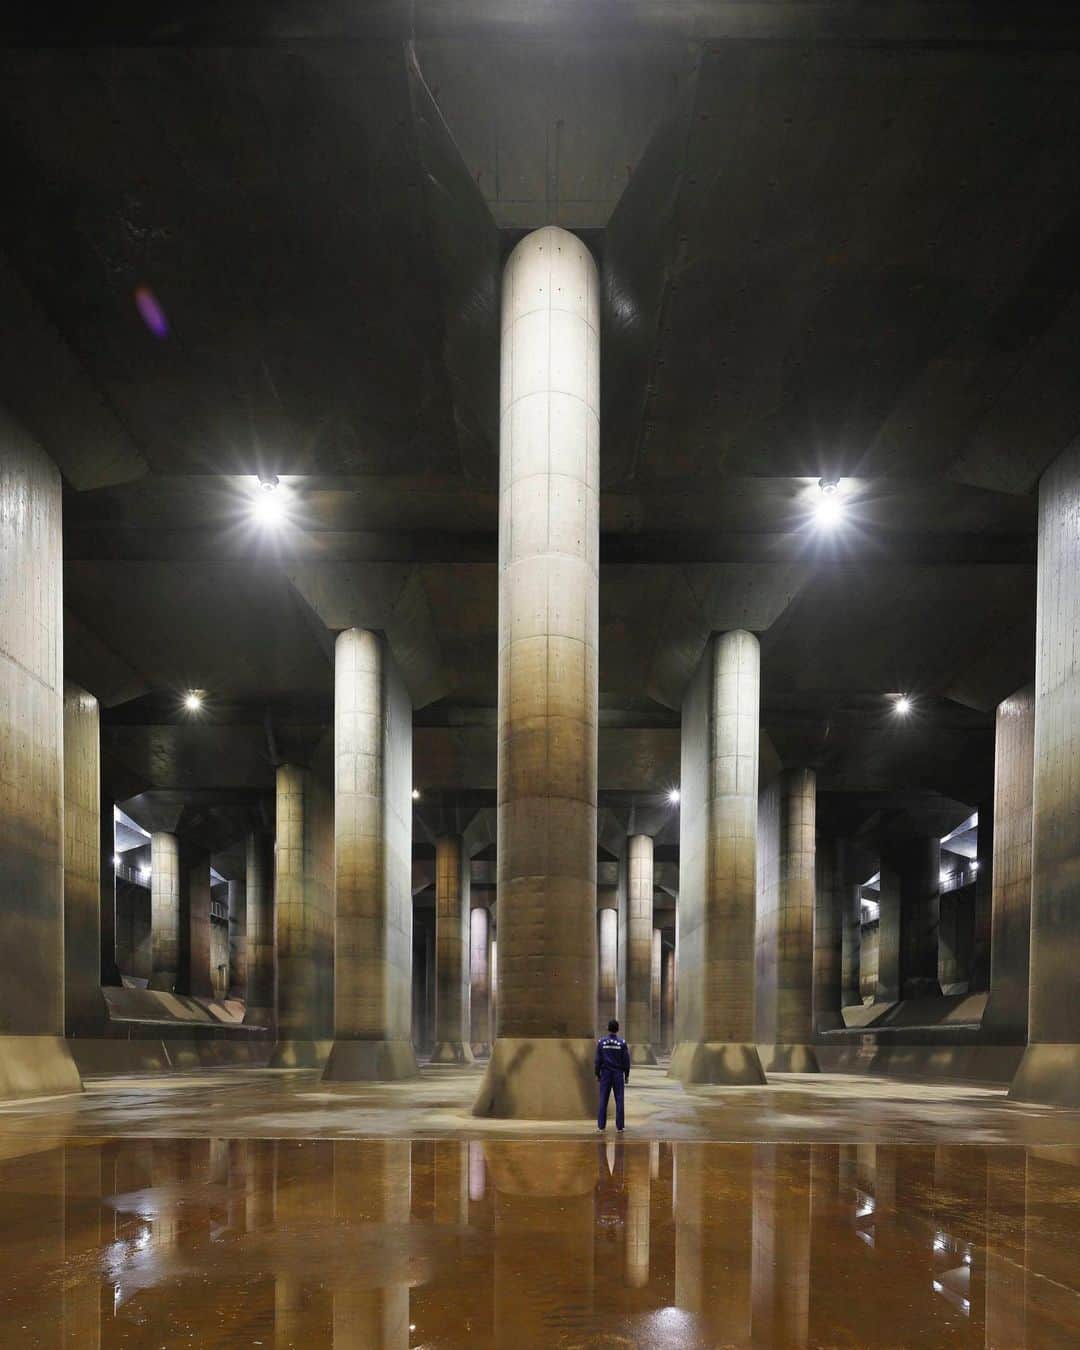 TOBU RAILWAY（東武鉄道）さんのインスタグラム写真 - (TOBU RAILWAY（東武鉄道）Instagram)「. . 🚩The Metropolitan Area Outer Underground Discharge Channel 🚩首都圏外郭放水路 🚩수도권 외곽 방수로 . . [Introduction to the Metropolitan Area Outer Underground Discharge Channel] . Site tours are available at the Metropolitan Area Outer Underground Discharge Channel  that flows approximately 50 meters below the ground.  It is one of the largest discharge channels in the world. You can see its inside, which resembles a huge temple, while learning about the latest flood control technology that is attracting attention globally.  This spot, popular for its mysterious atmosphere,  is also known as a site for photography/shooting films. You can apply for tours from the following URL. To switch languages, use the button at the upper right.  Access: The nearest station is Tobu Noda Line Minami-Sakurai Station. https://www.gaikaku.jp . . 【수도권 외곽 방수로의 소개】 . 지하 약 50m를 흐르는 세계 최대급 수도권 외곽 방수로에서는 견학 투어를 실시하고 있습니다. 거대 신전과 같은 내관과 세계적으로도 주목받고 있는 수해를 막는 최첨단 기술을 배울 수 있습니다. 신비스러운 분위기로 인기가 있으며 사진 촬영이나 영화 촬영지로도 알려져 있습니다. 아래 URL에서 견학 투어 신청을 할 수 있습니다. 오른쪽 위의 언어 전환 버튼을 이용해 주십시오. 오시는 길 가장 가까운 역 도부 노다 선 미나미사쿠라이 역 https://www.gaikaku.jp . . . . #tobujapantrip #japan #architecture #architecture_japan #coolarchitecture #japanlandscape  #photo_shorttrip #photo_travelers  #jp_gallery #instatravel #worldcaptures #nationalgeographic#visitjapan #travelingram #bestjapanpics #lovejapan #japan_of_insta #art_of_japan_  #beautifuljapan #cooljapan#일본여행 #여행기록 #여행스냅 #일본체험」9月4日 10時30分 - tobu_japan_trip